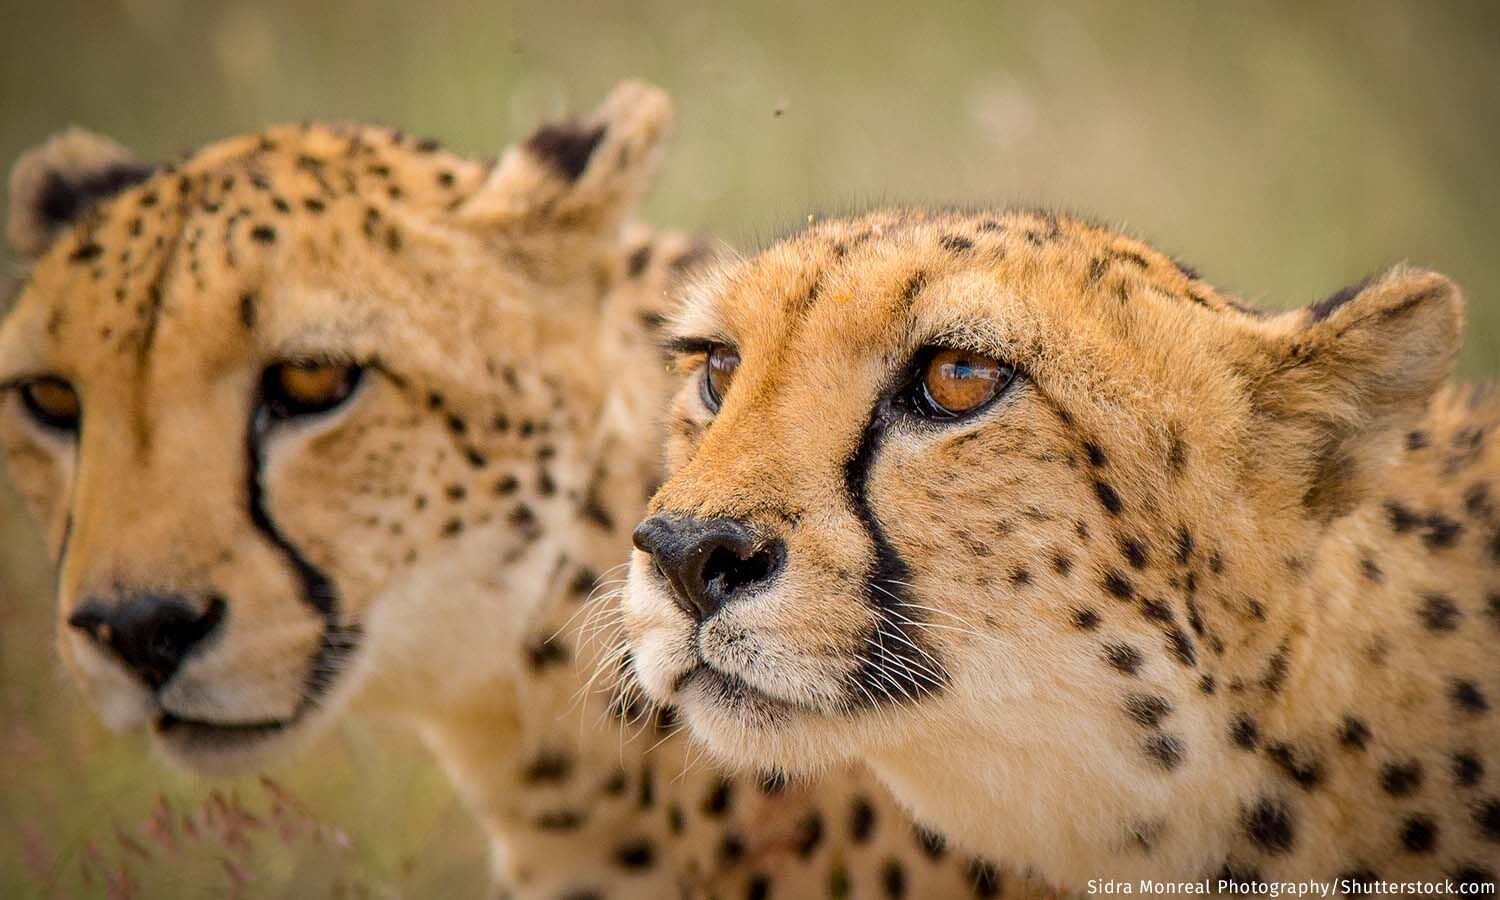 Why did cheetahs come to India from Namibia instead of Iran